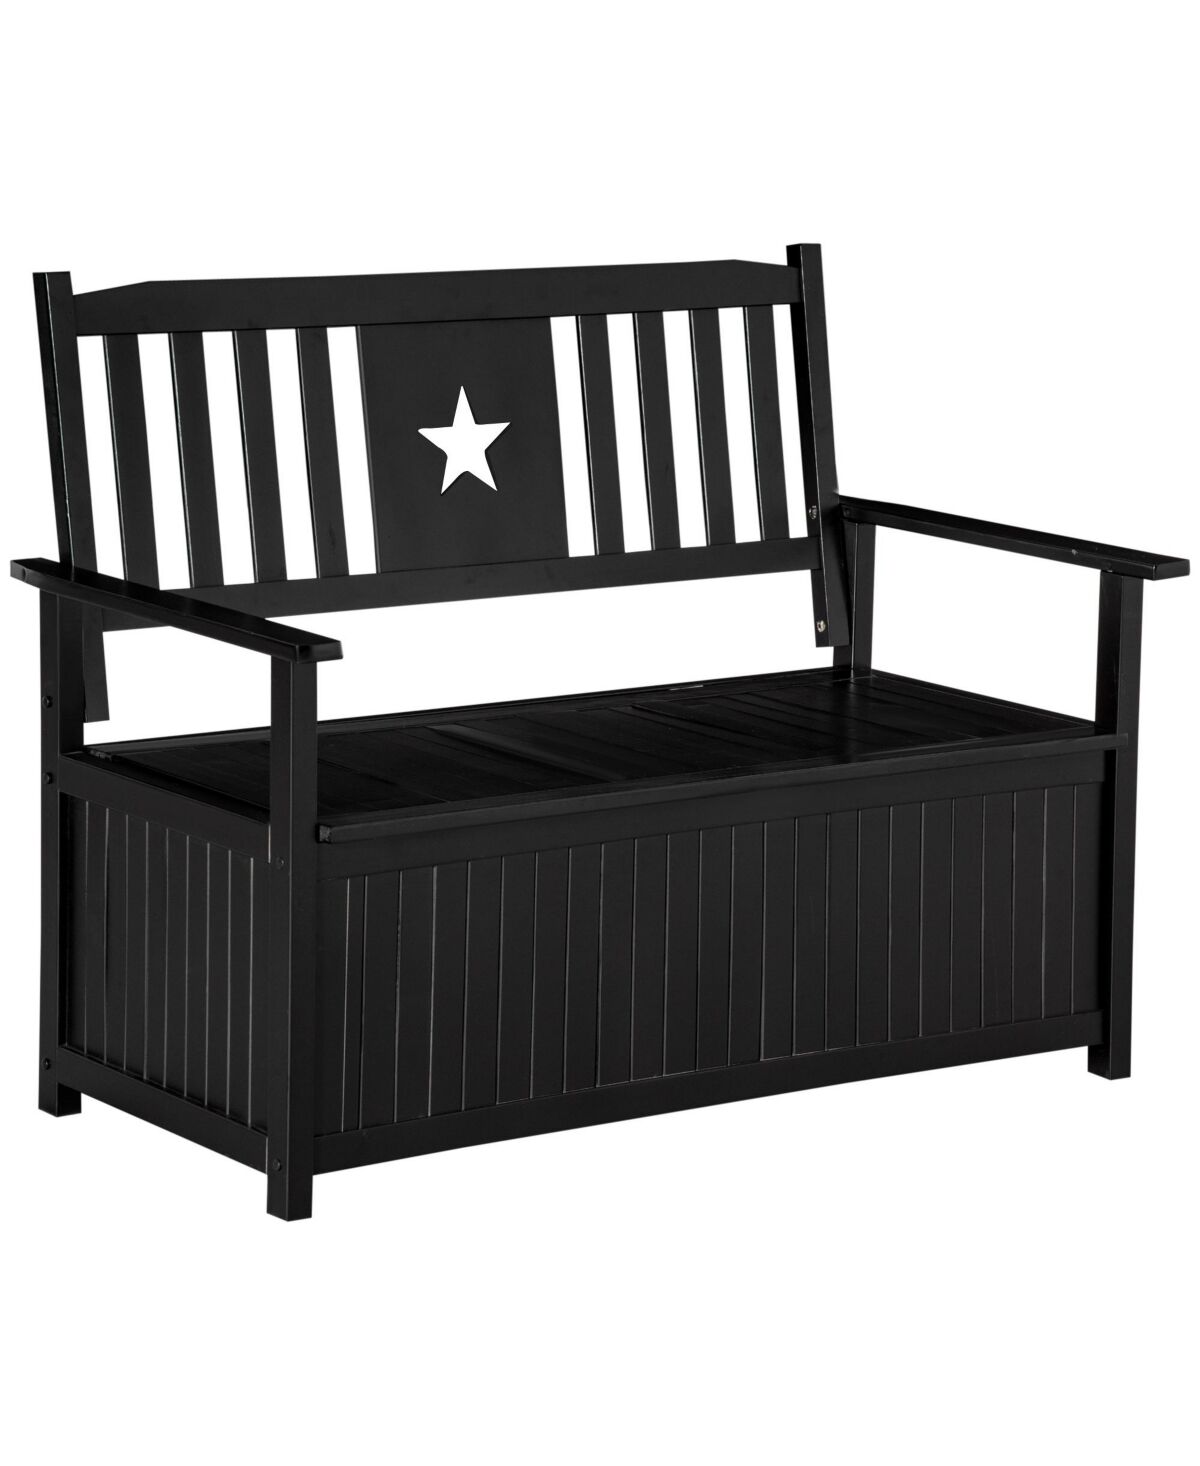 Outsunny Outdoor Storage Bench, 2-Seat Loveseat Style Wooden Patio Furniture, Armrests, 43 Gallon Deck Box, Black - Black